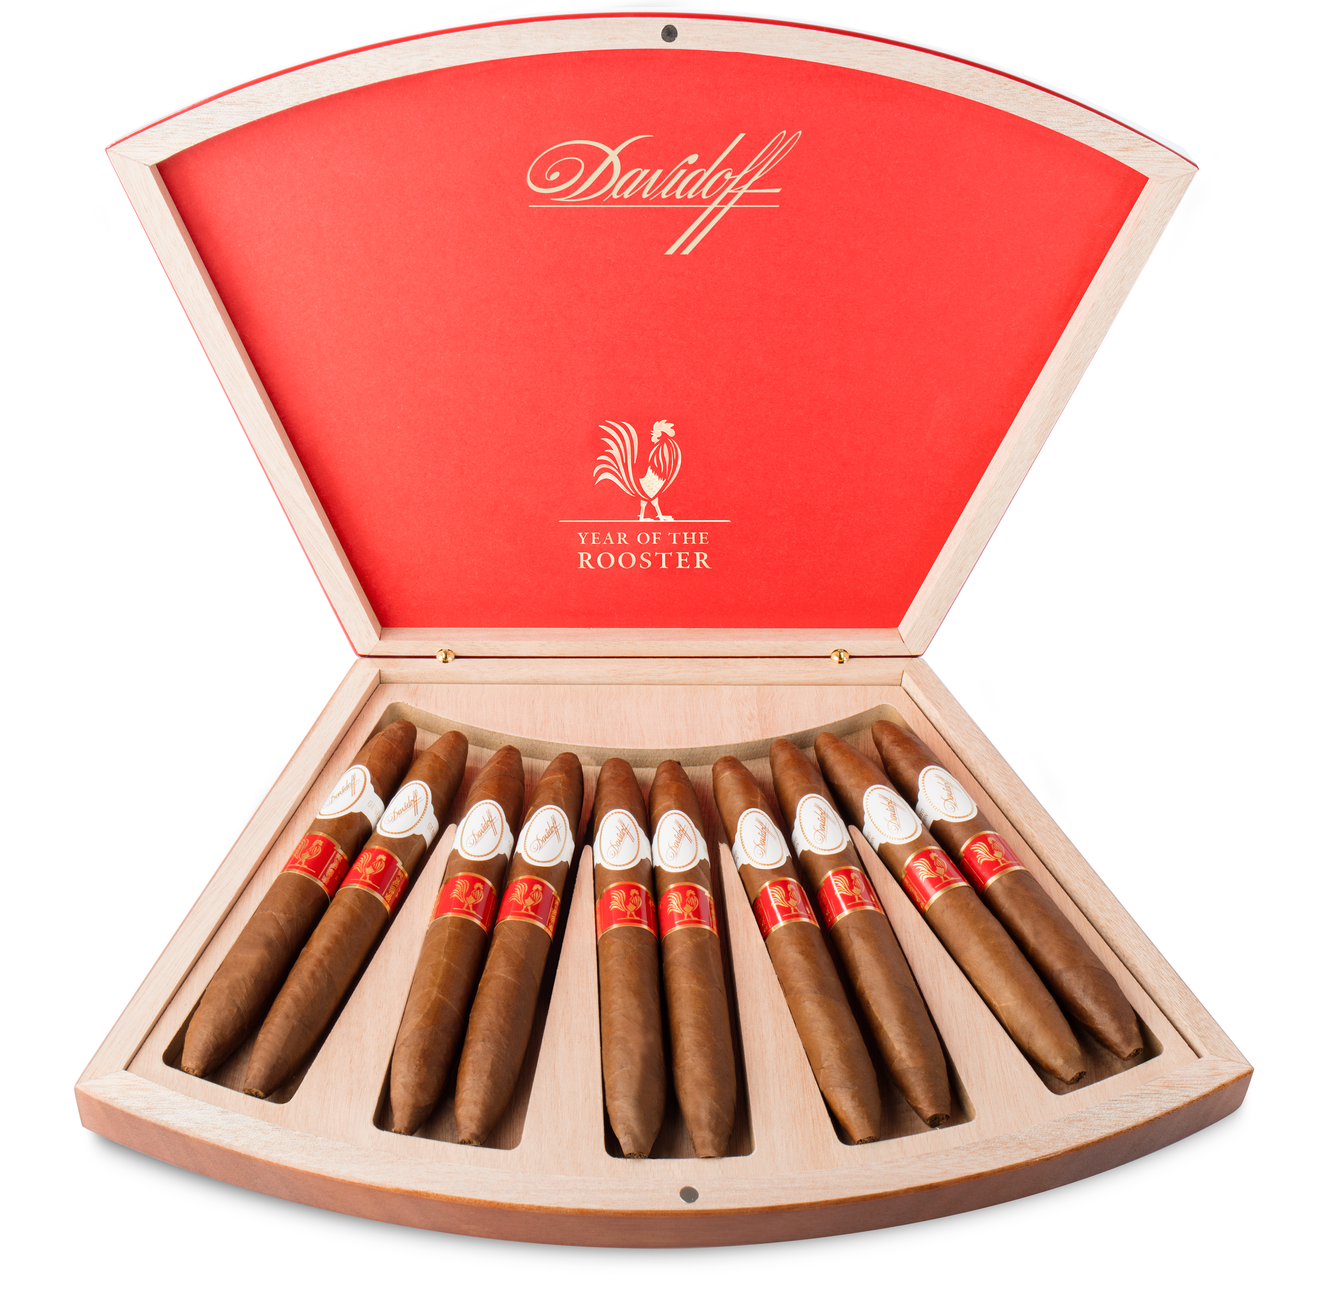 davidoff_year_of_the_rooster_limited_edition_2017